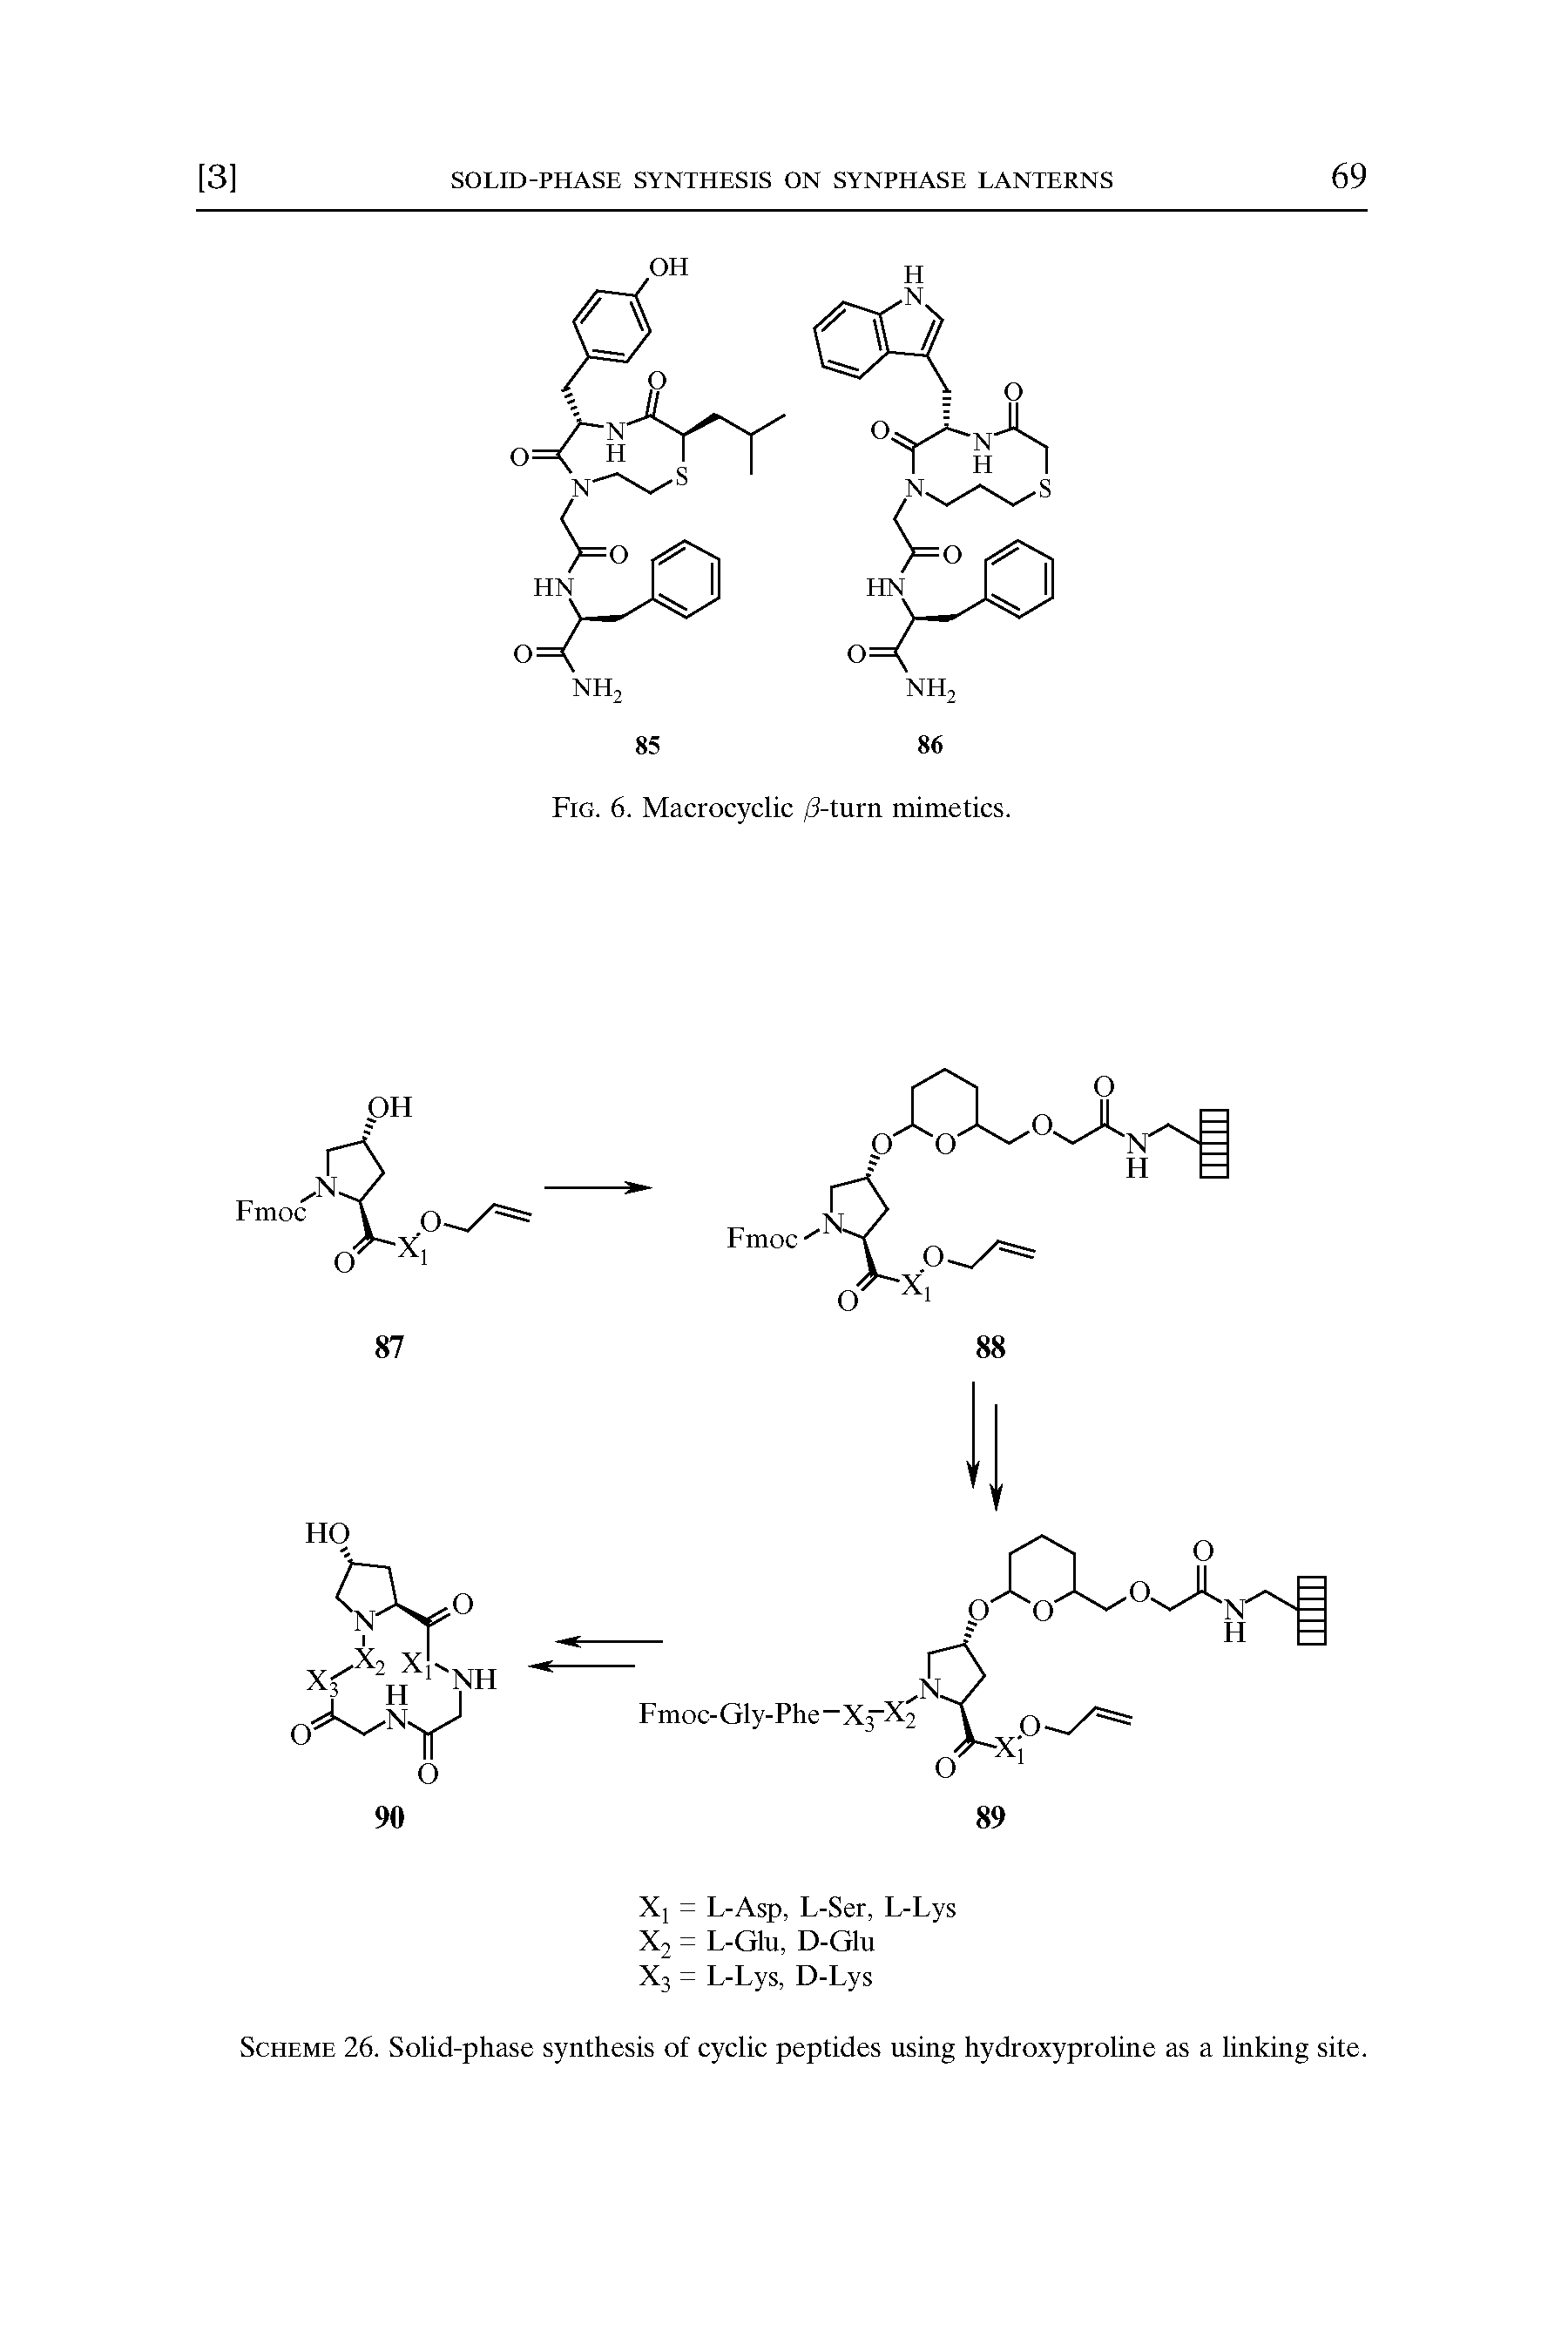 Scheme 26. Solid-phase synthesis of cyclic peptides using hydroxyproline as a linking site.